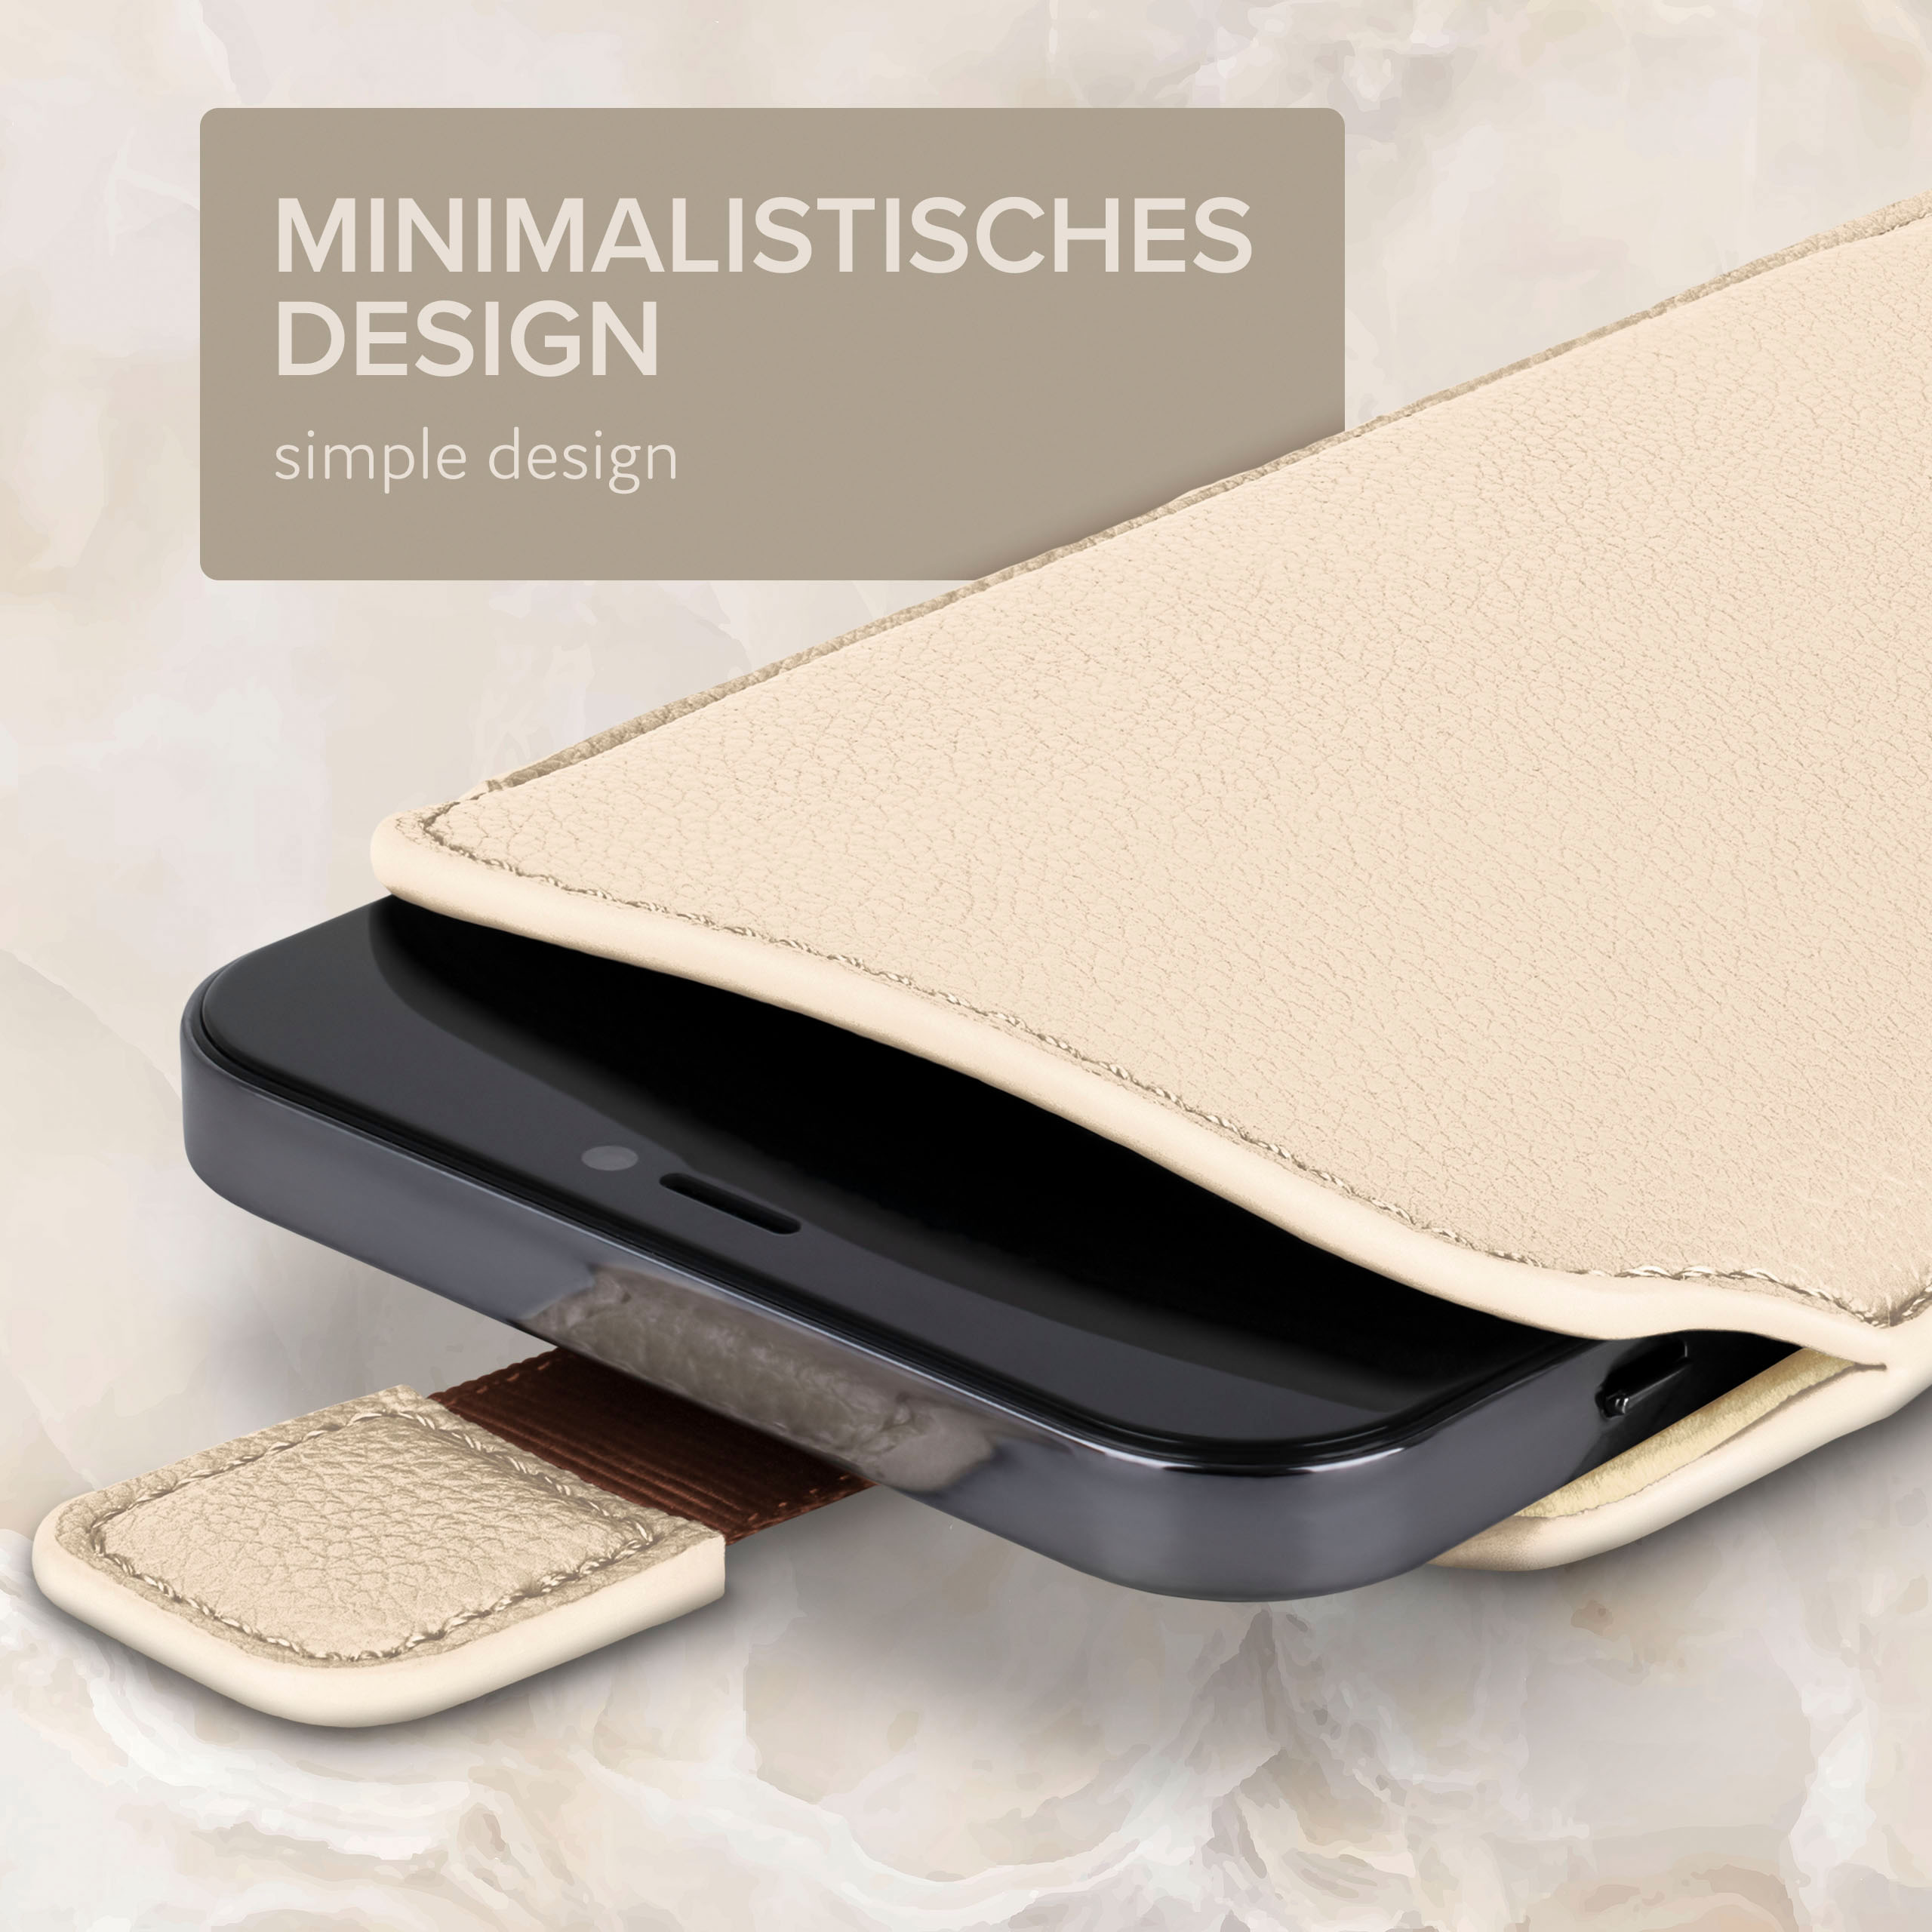 mit P30 Ed, New Creme Huawei, Pro/P30 ONEFLOW Cover, Pro Einsteckhülle Zuglasche, Full